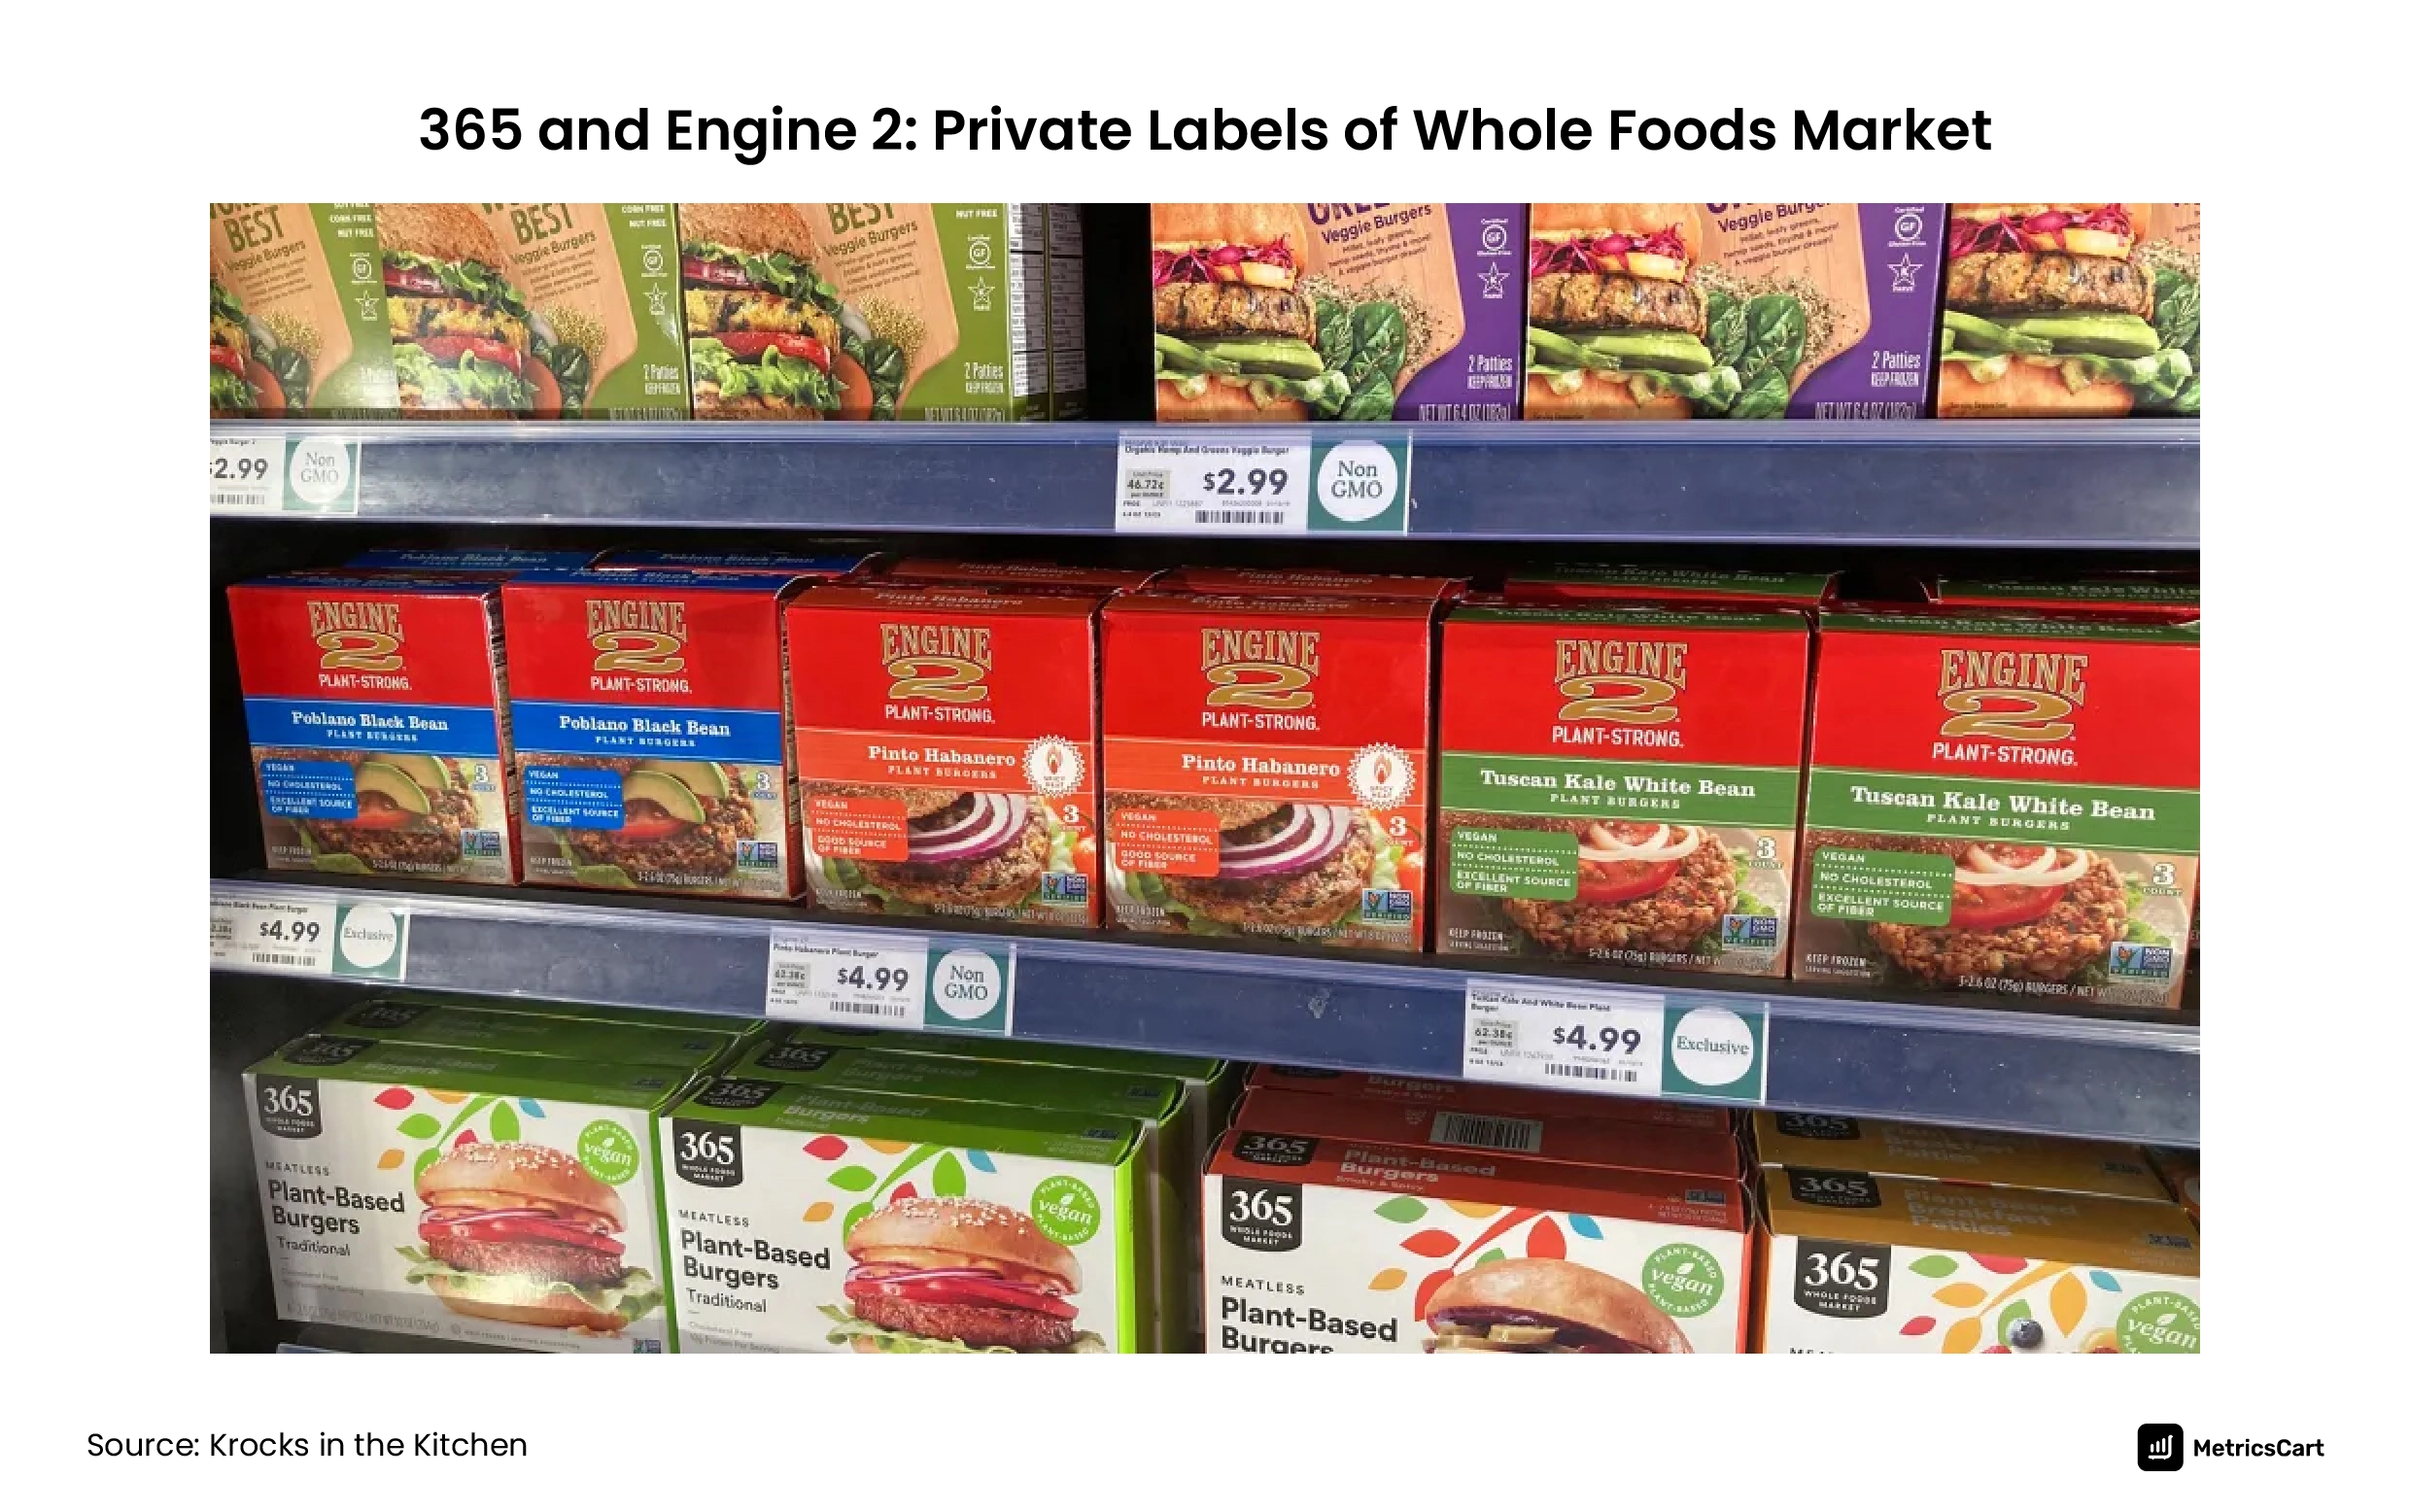 Whole Foods Private Labels